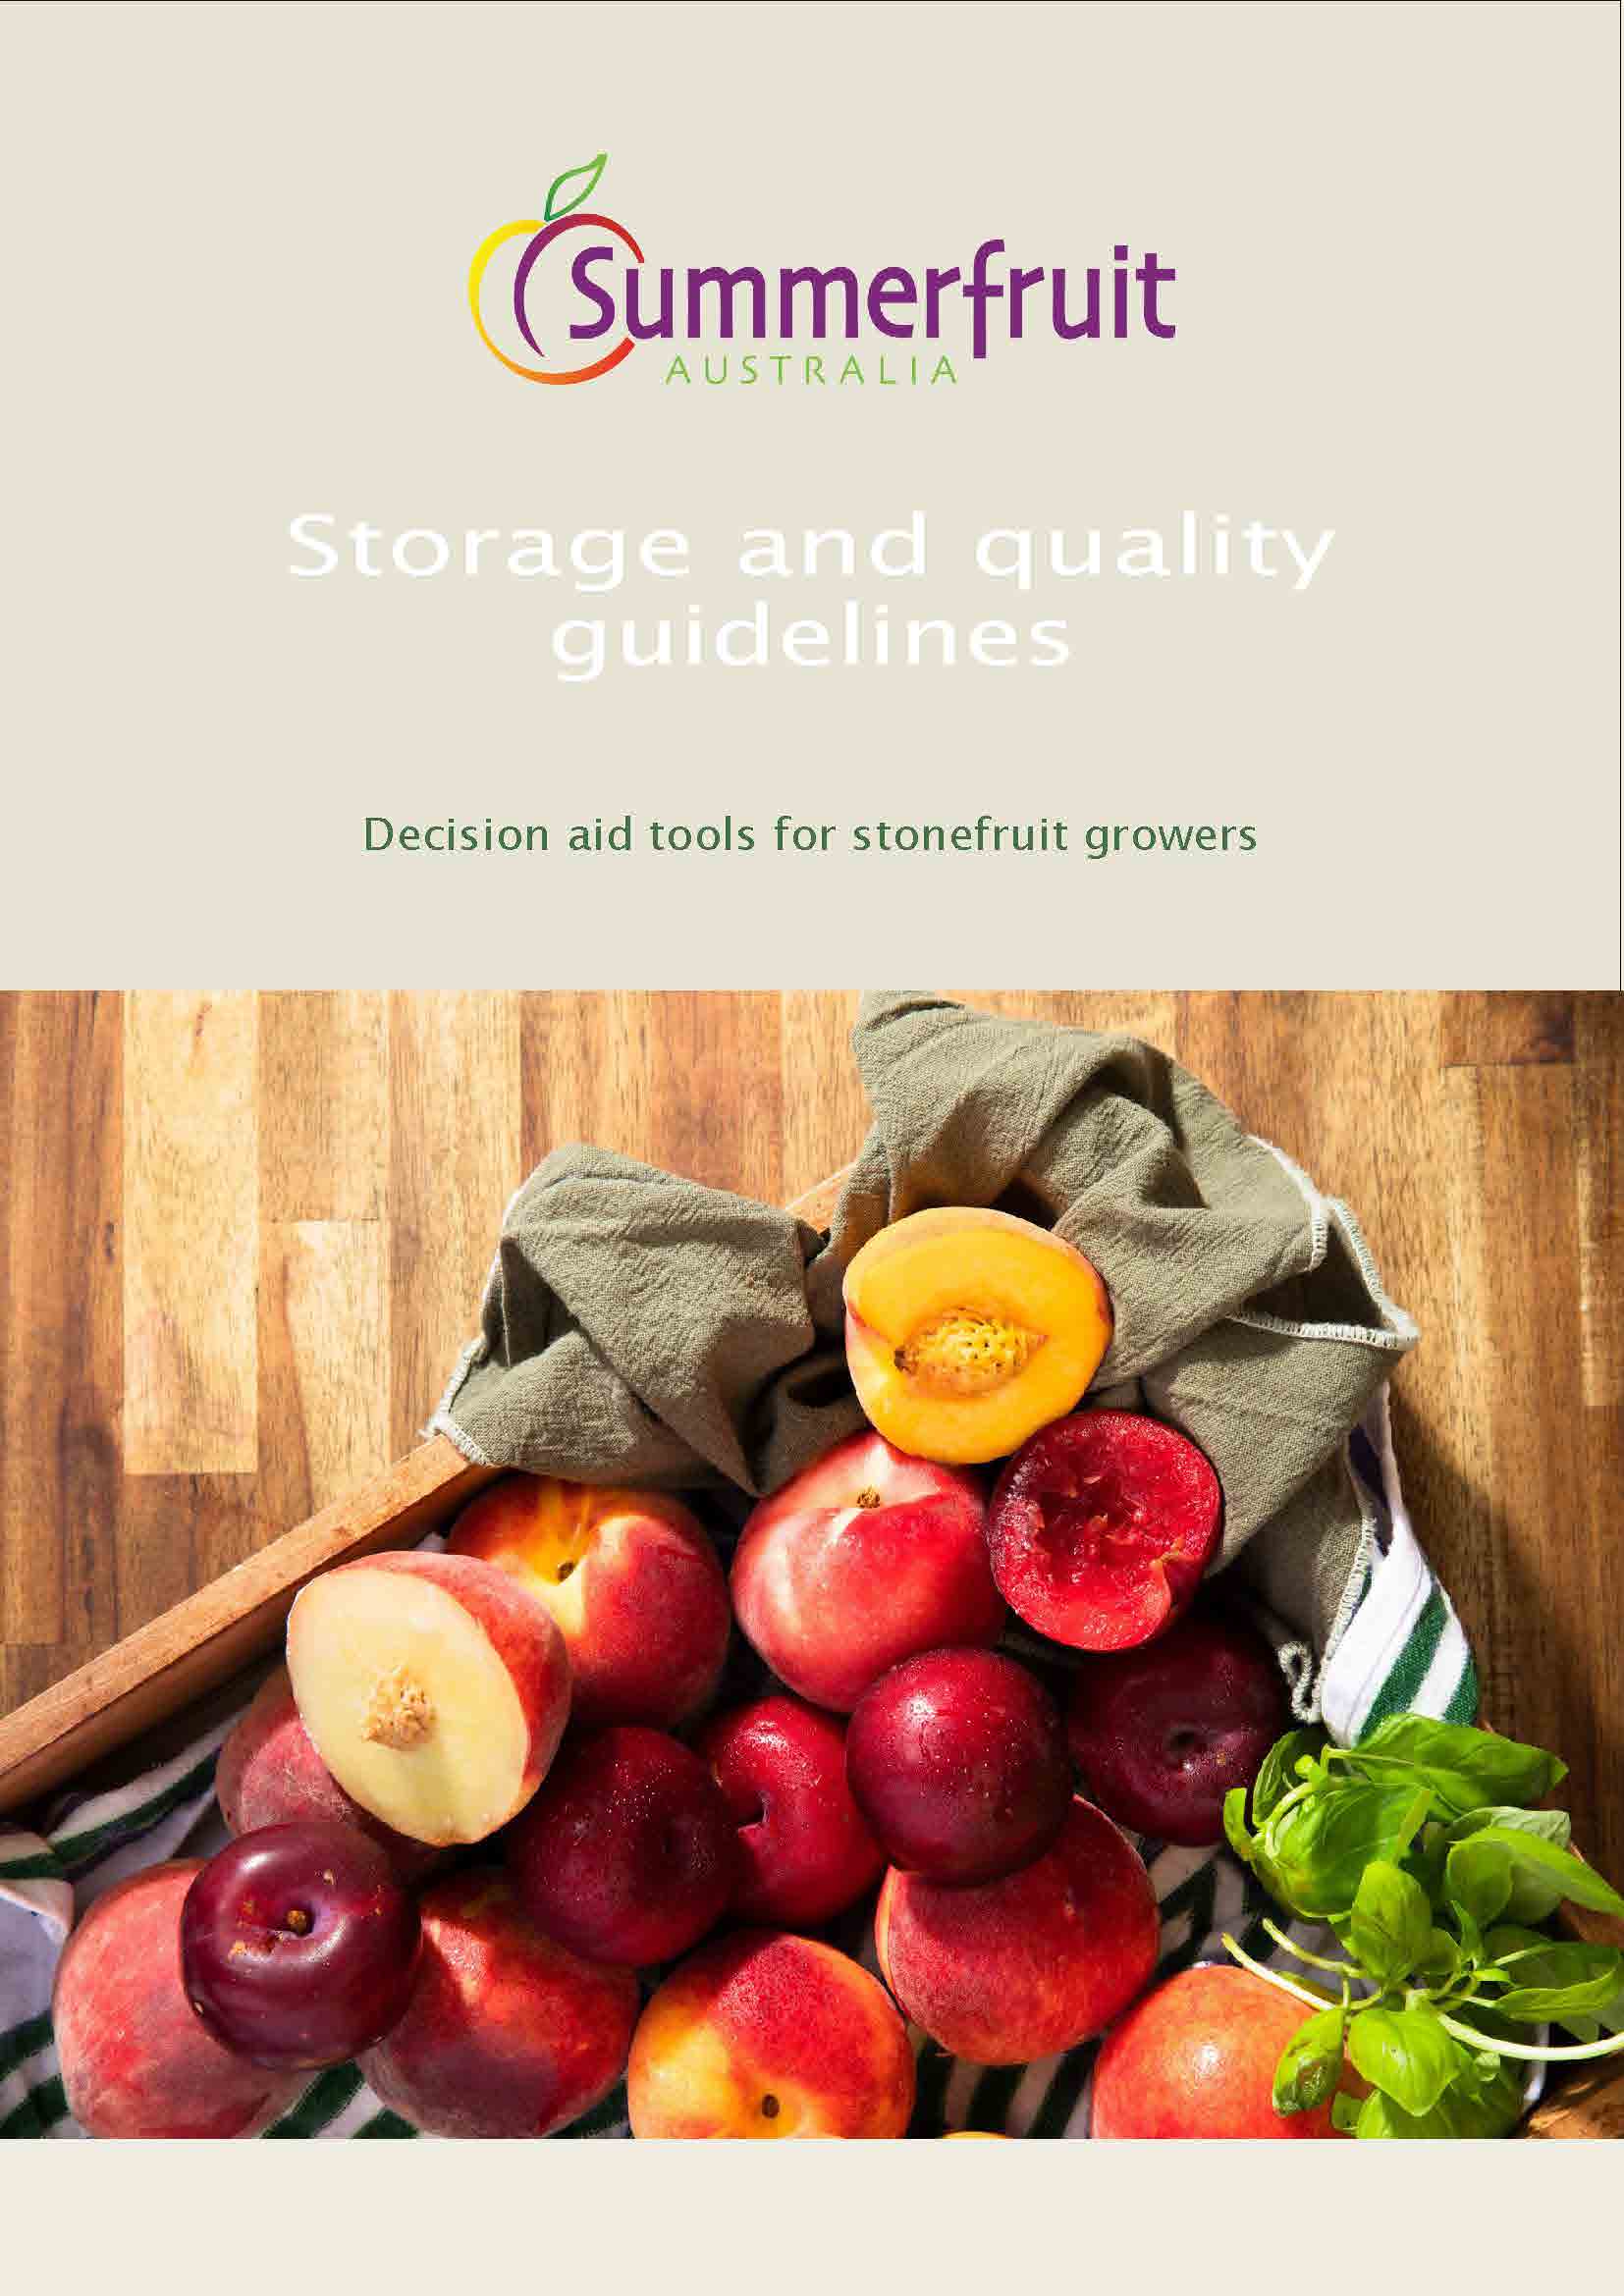 Maturity assessments, step-wise cooling and exporting practices to help maximise shelf life and fruit quality